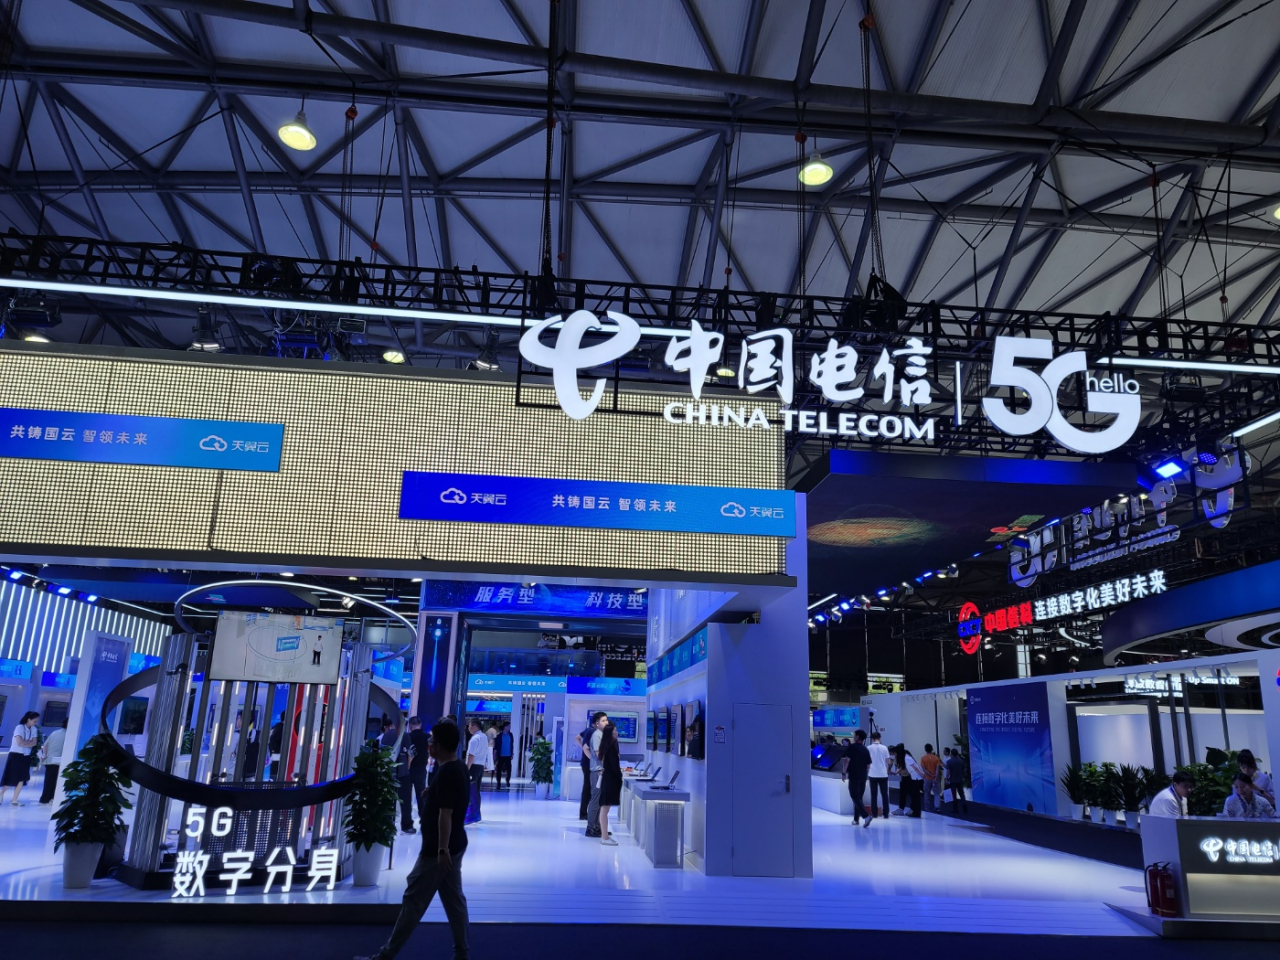 China Telecom's 5G-related exhibition booth during the MWC Shanghai 2023 at Shanghai New International Expo Center in Shanghai. (Jie Ye-eun/The Korea Herald)